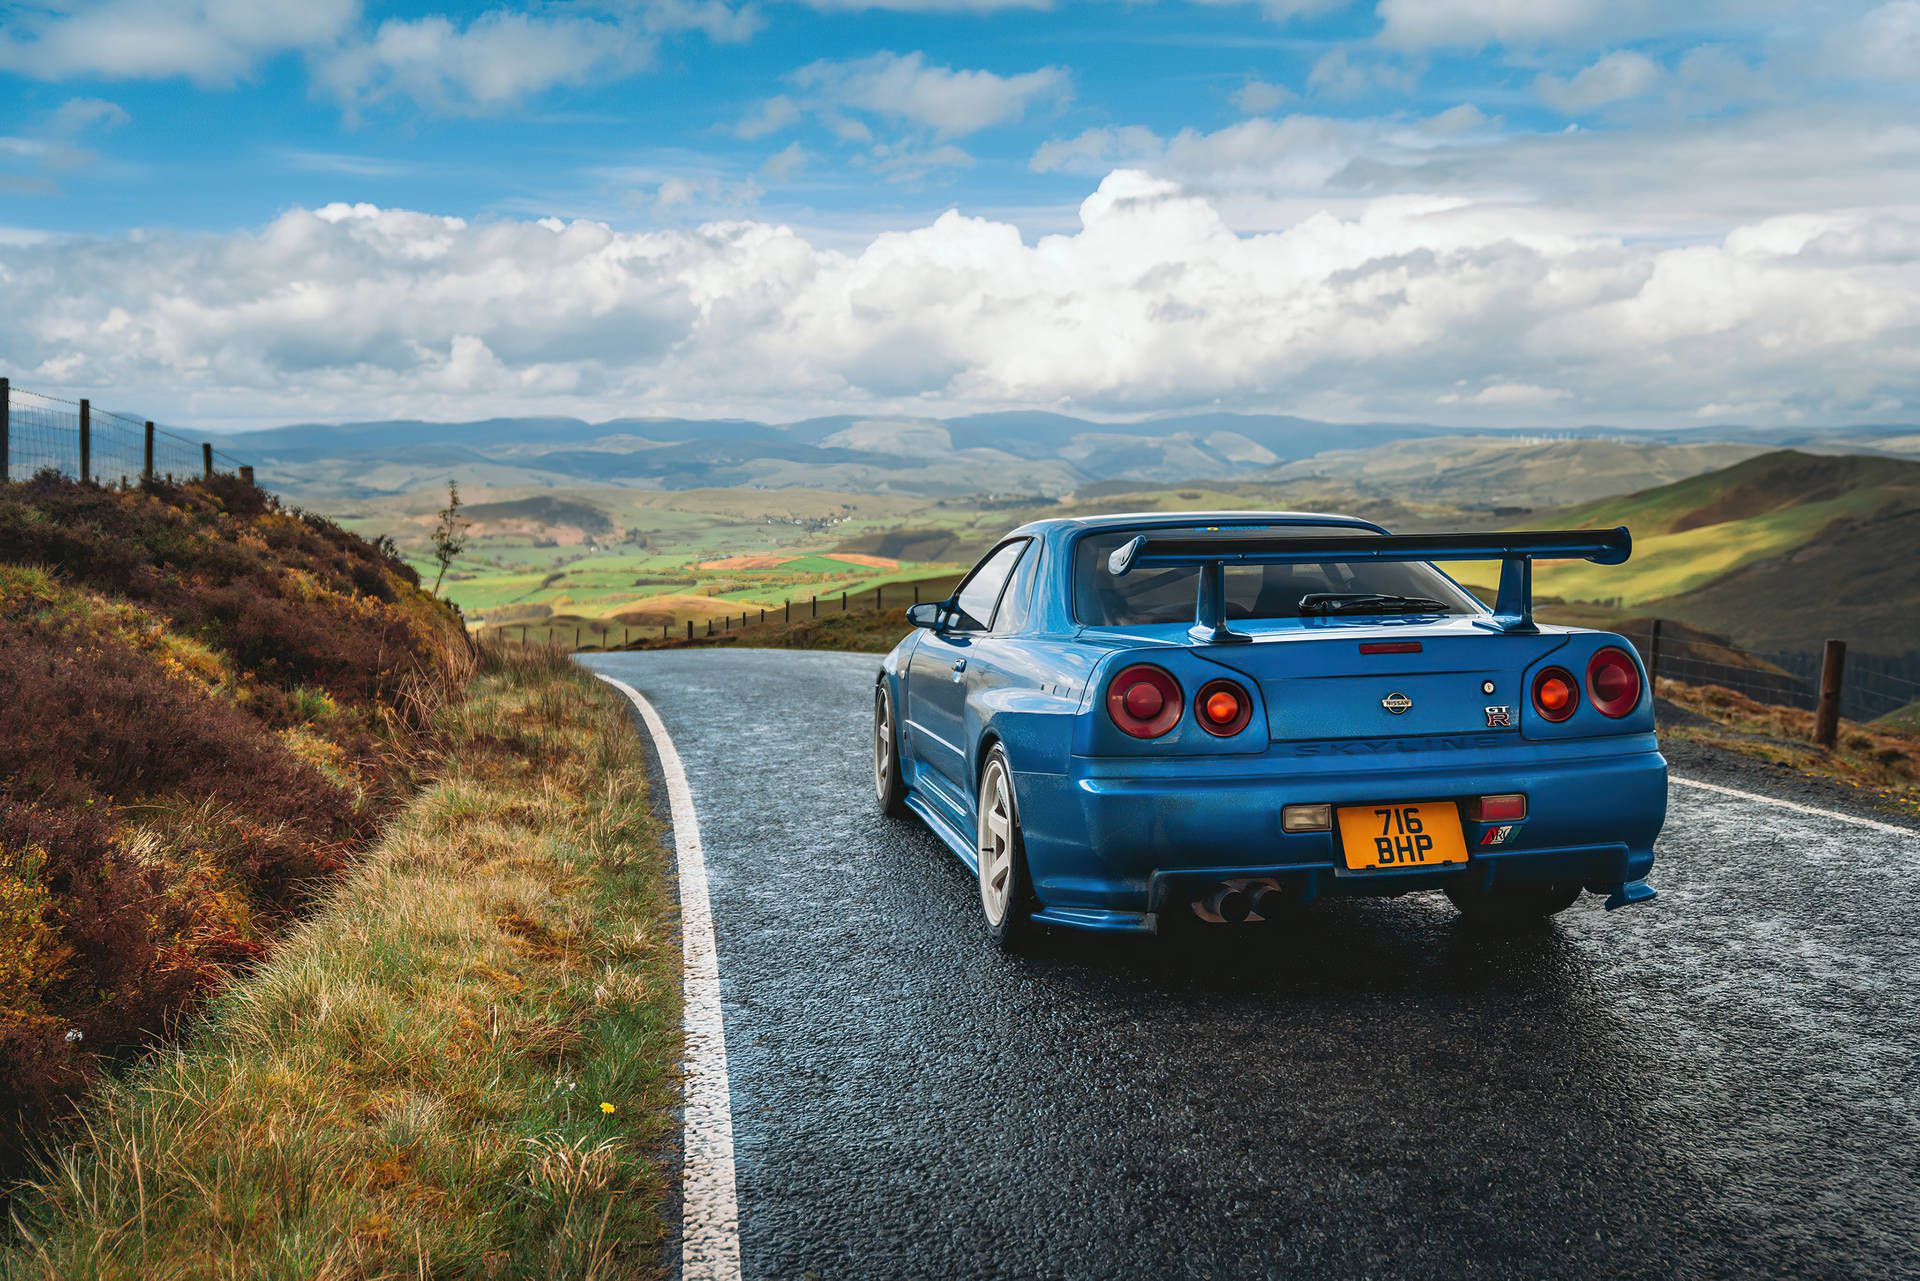 A blue car driving down the road - Nissan Skyline